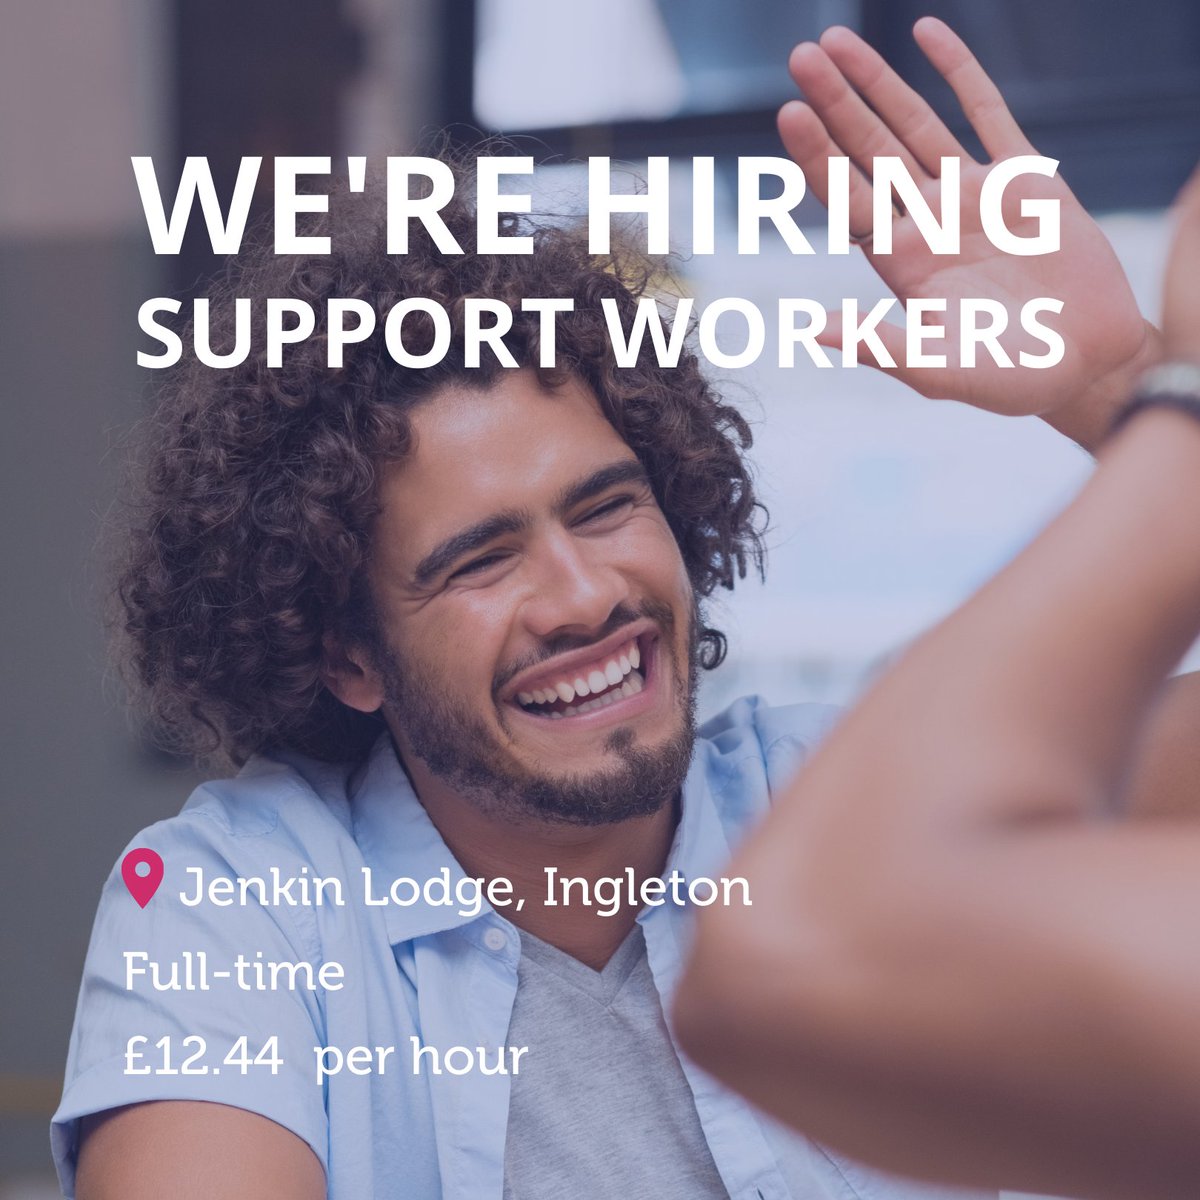 We are looking for Support Workers to join our team at Jenkin Lodge, #Ingleton. Located in a beautiful area, the service is warm and friendly and prides itself on providing high-quality care. To discover more see: tinyurl.com/4e755mcn #care #charity #job #employment